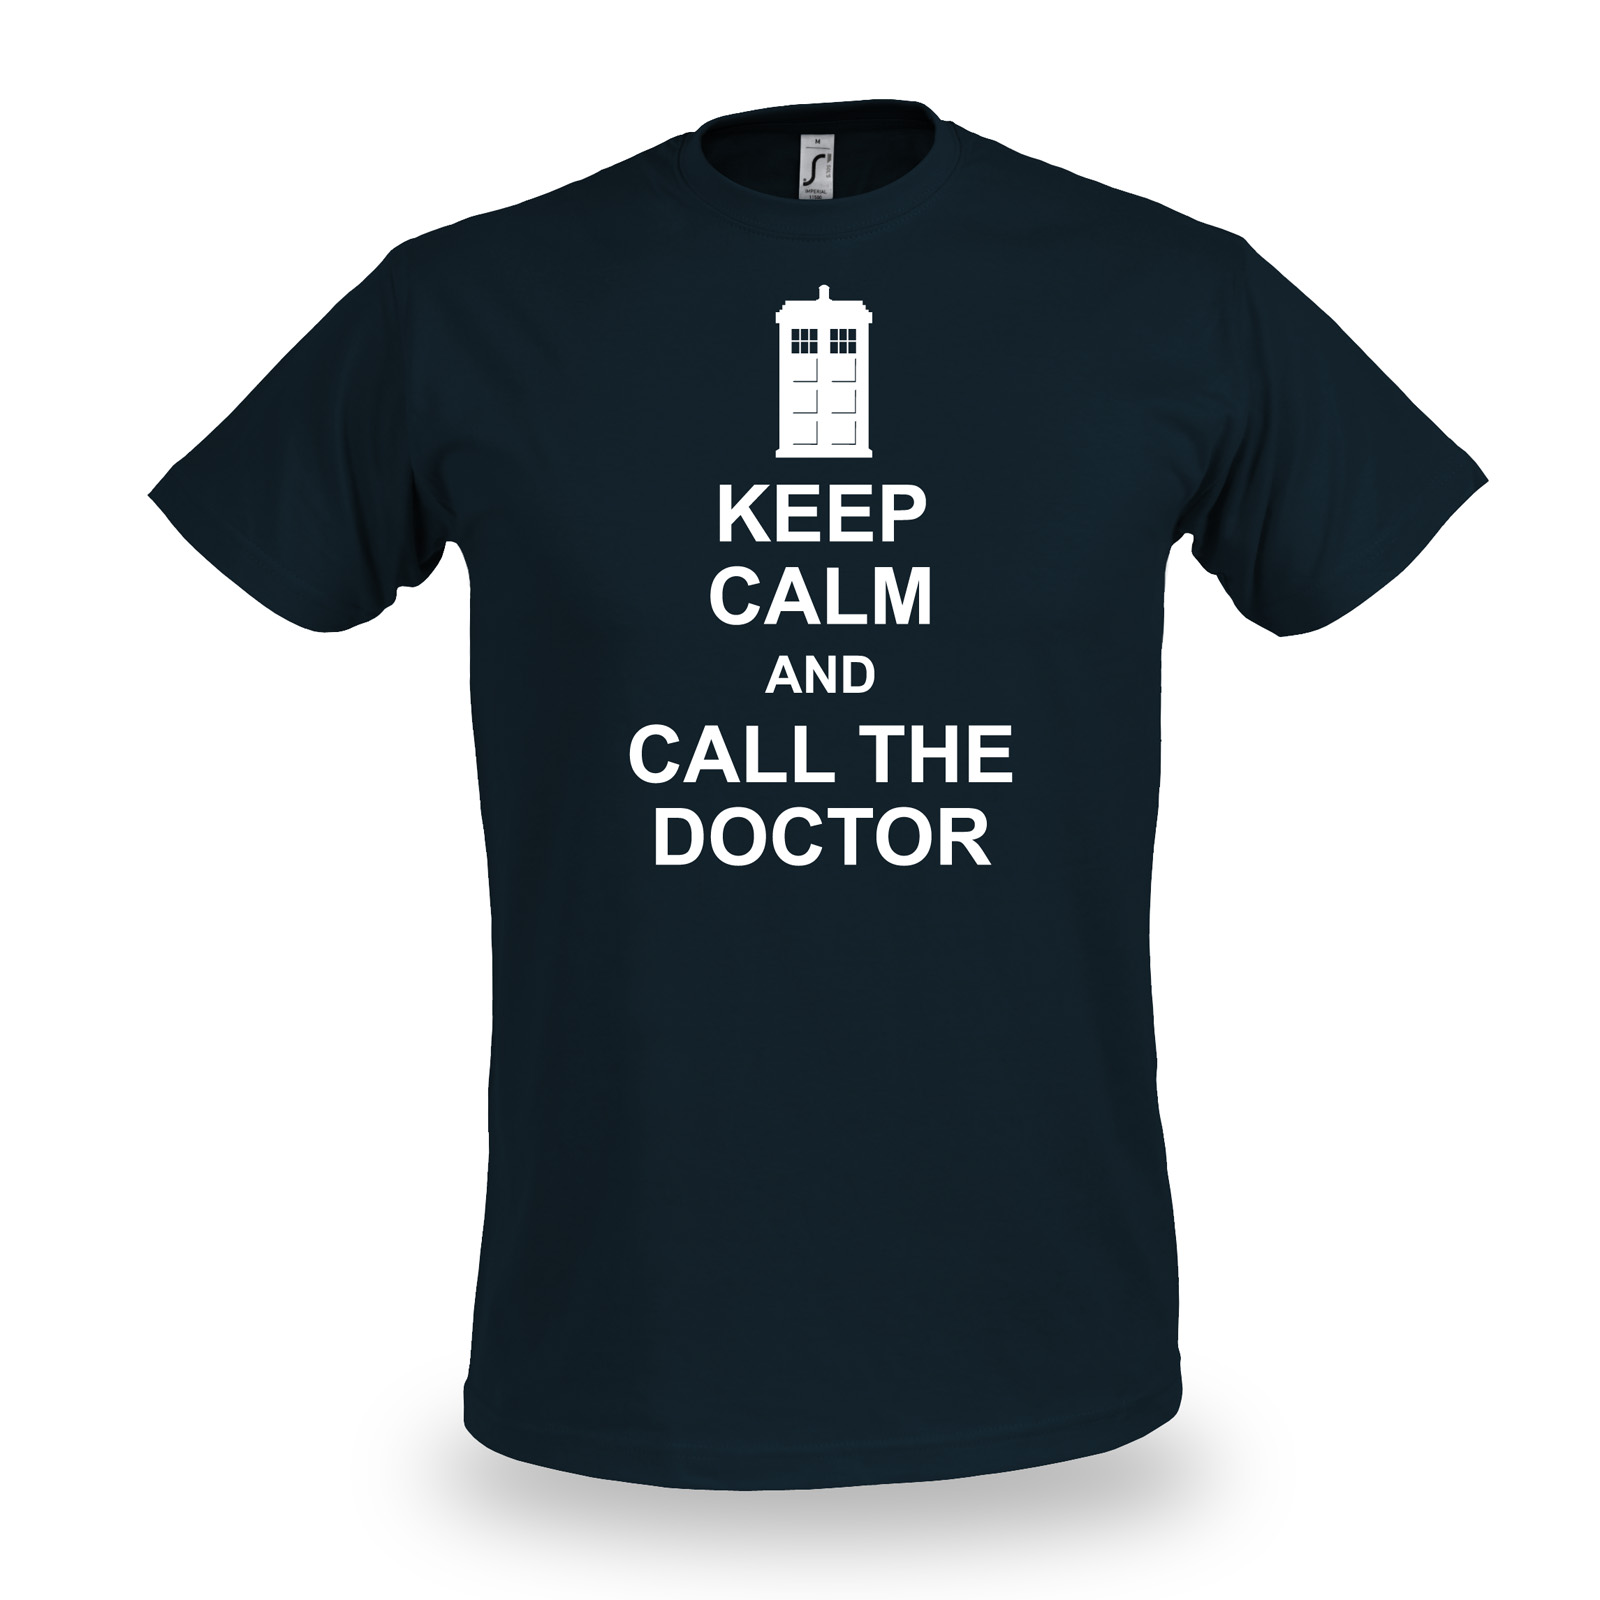 Call the Doctor T-Shirt